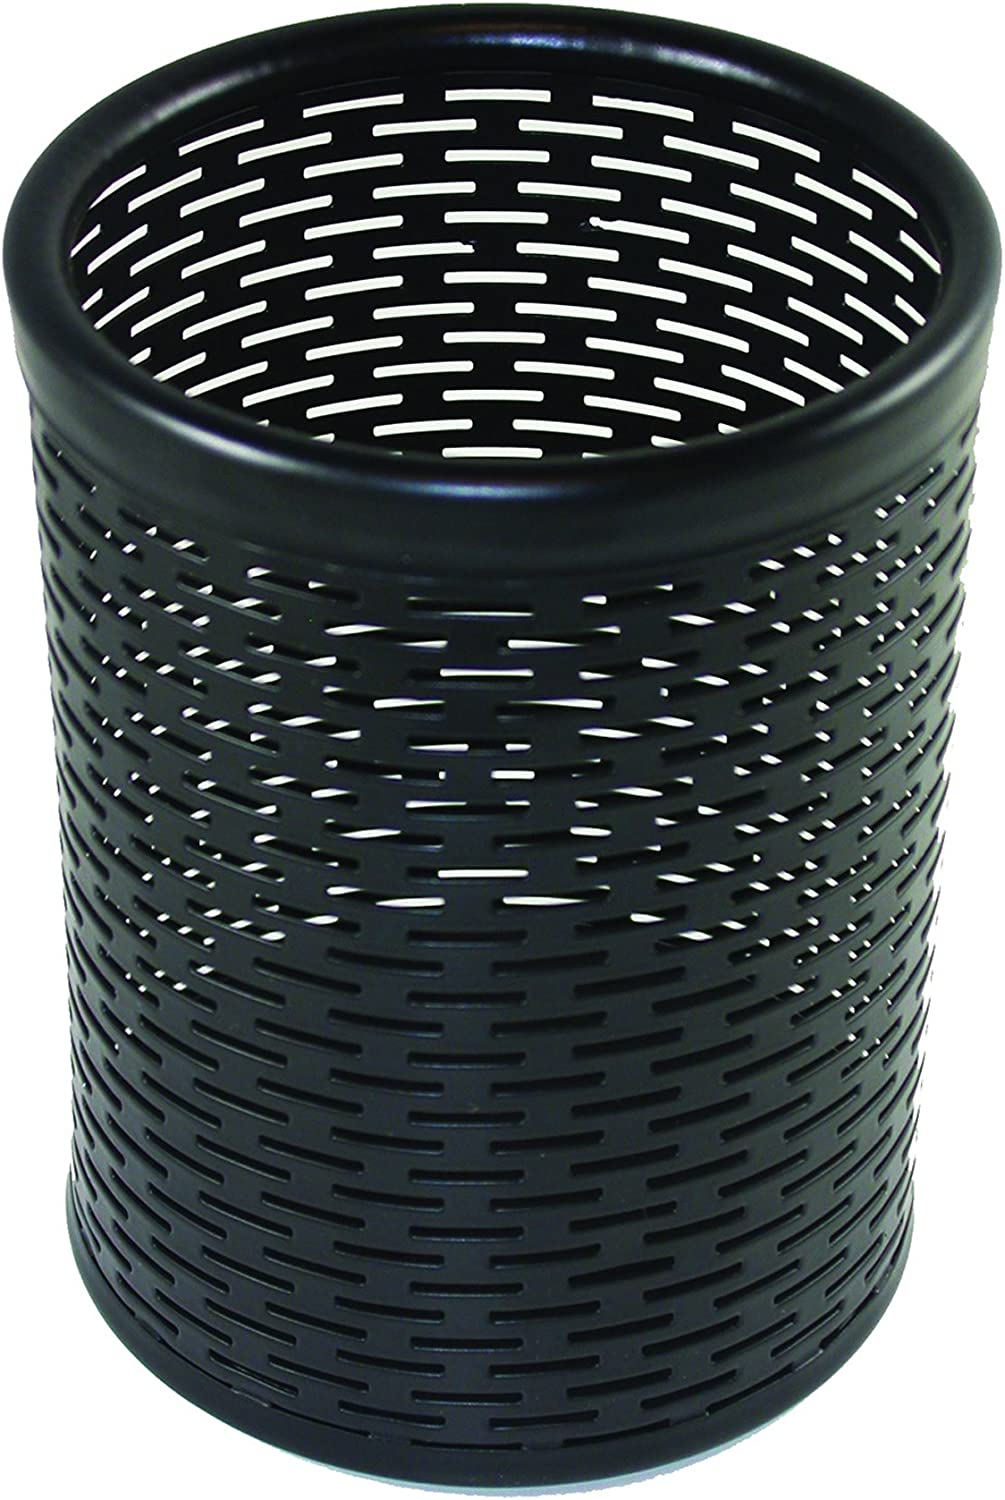 Artistic Punched Metal Pencil Cup - Black